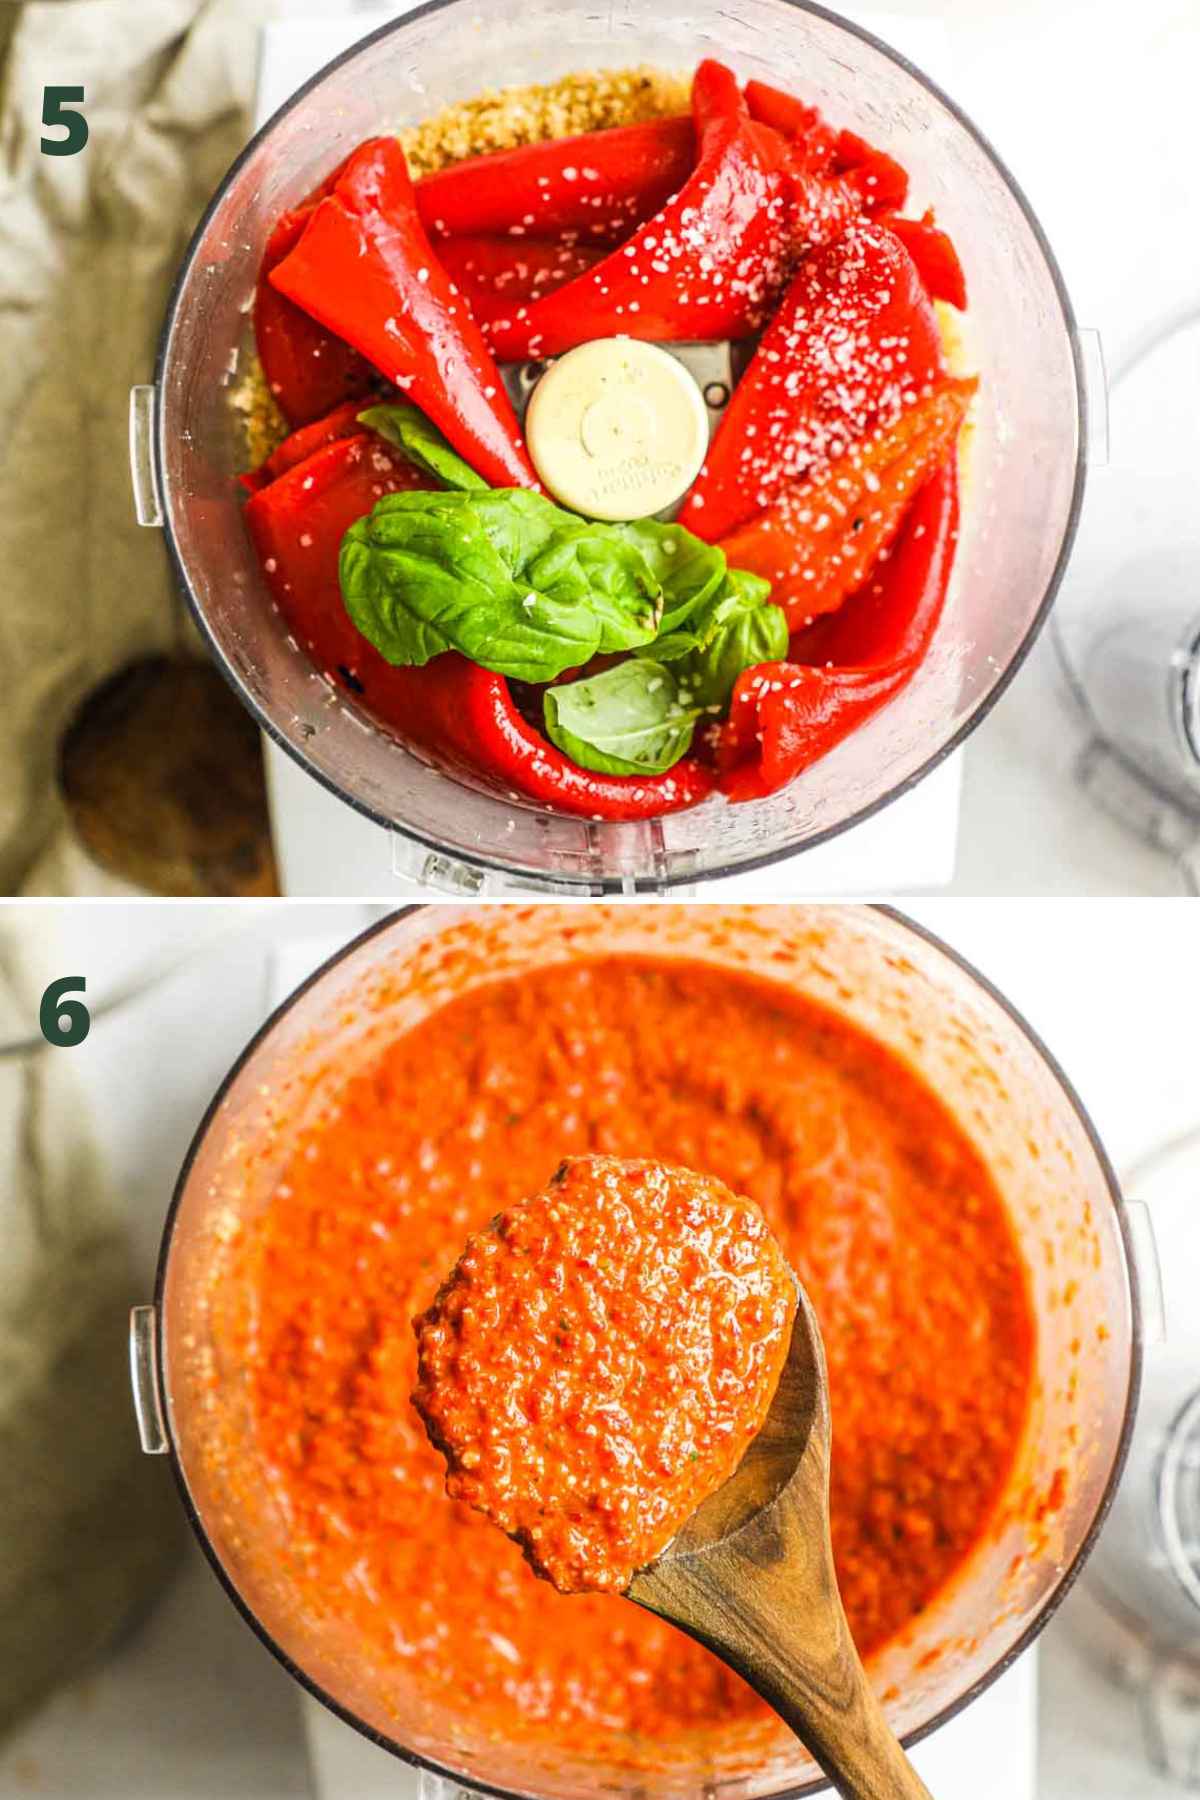 How to make roasted red pepper pesto, including adding the roasted red peppers, basil, and kosher salt to the food processor and blending.